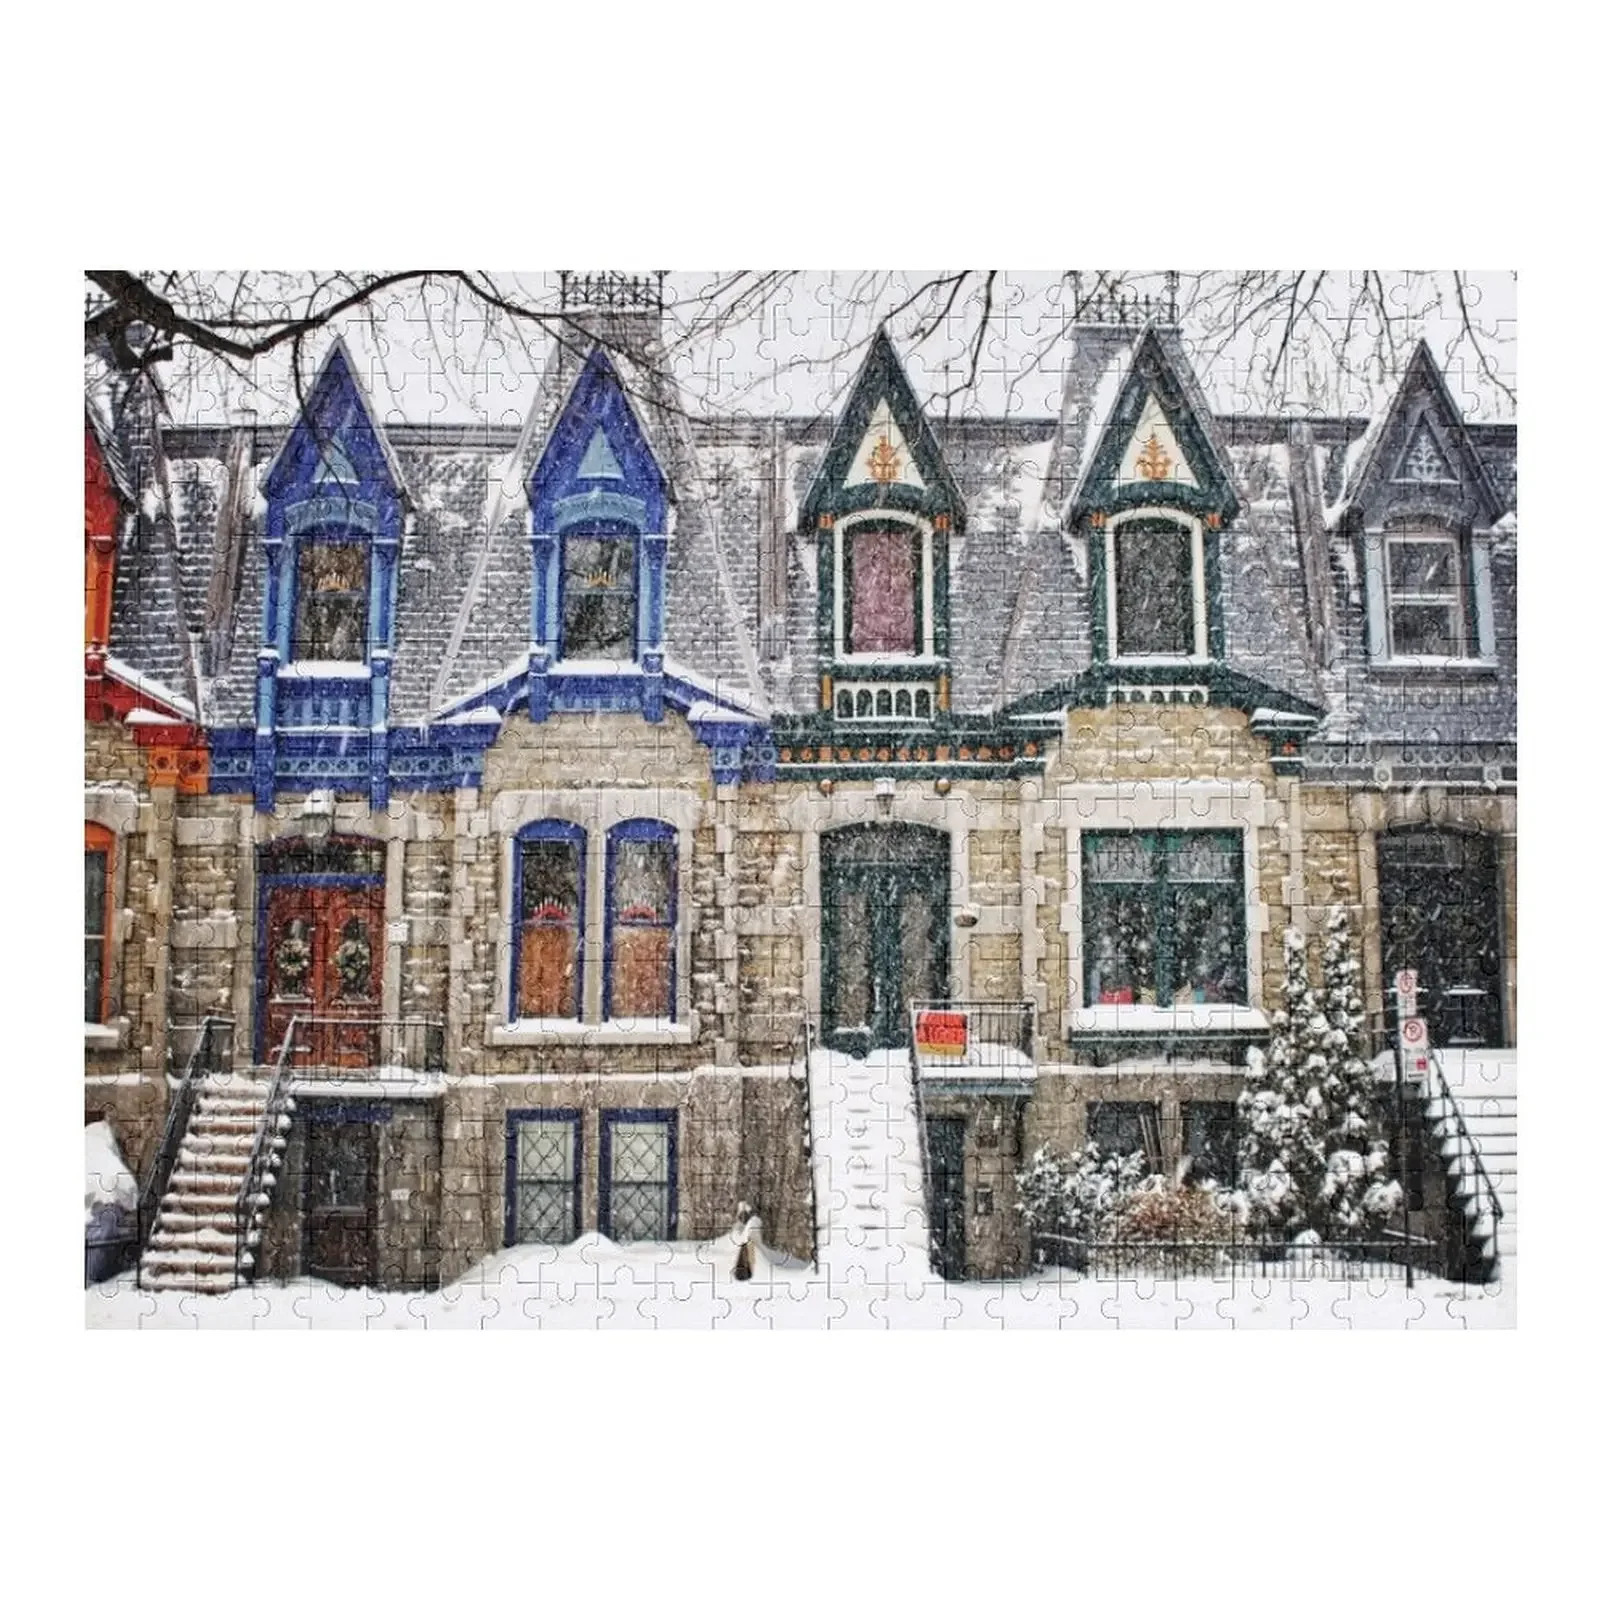 Montreal Victorian Architecture - The Enchanted Winter Jigsaw Puzzle Wooden Boxes Wooden Decor Paintings Puzzle architecture in asmara